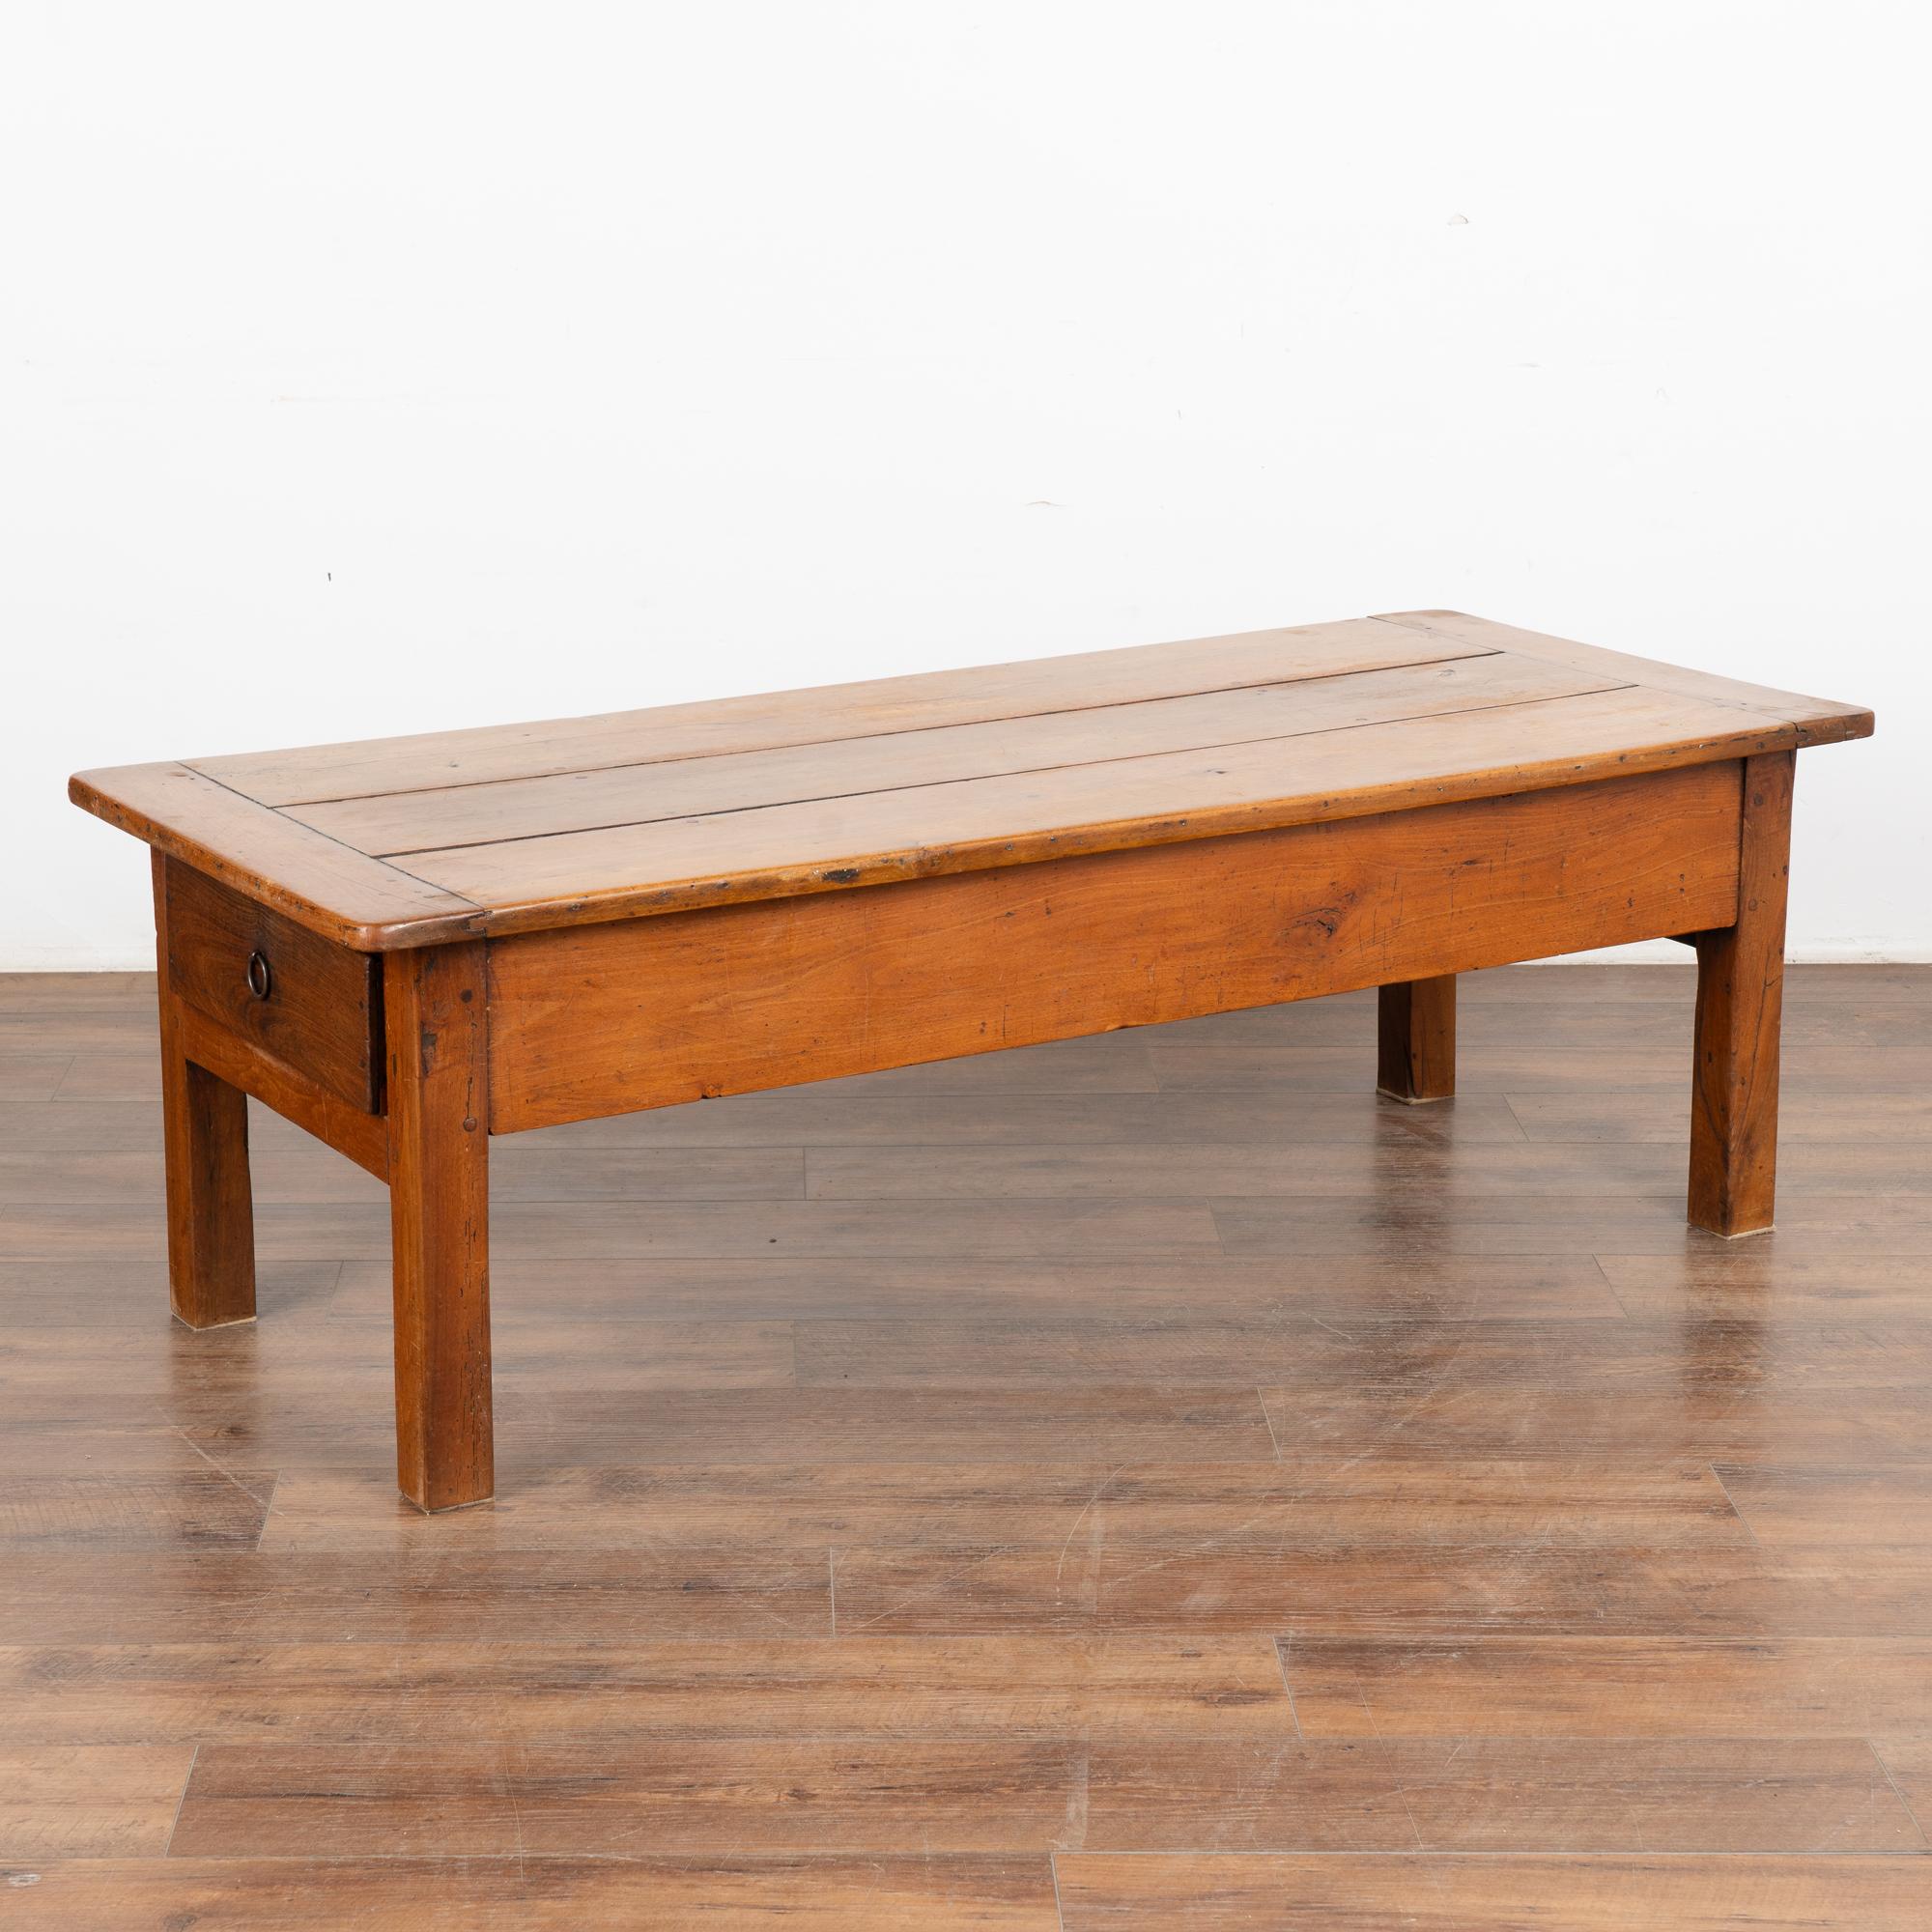 The lovely patina of the aged wood glows in this coffee table from France. Two long drawers accent each end.
Every scratch, nick, crack and aged separation of the three planks that comprise the top simply add to the vintage draw of this coffee